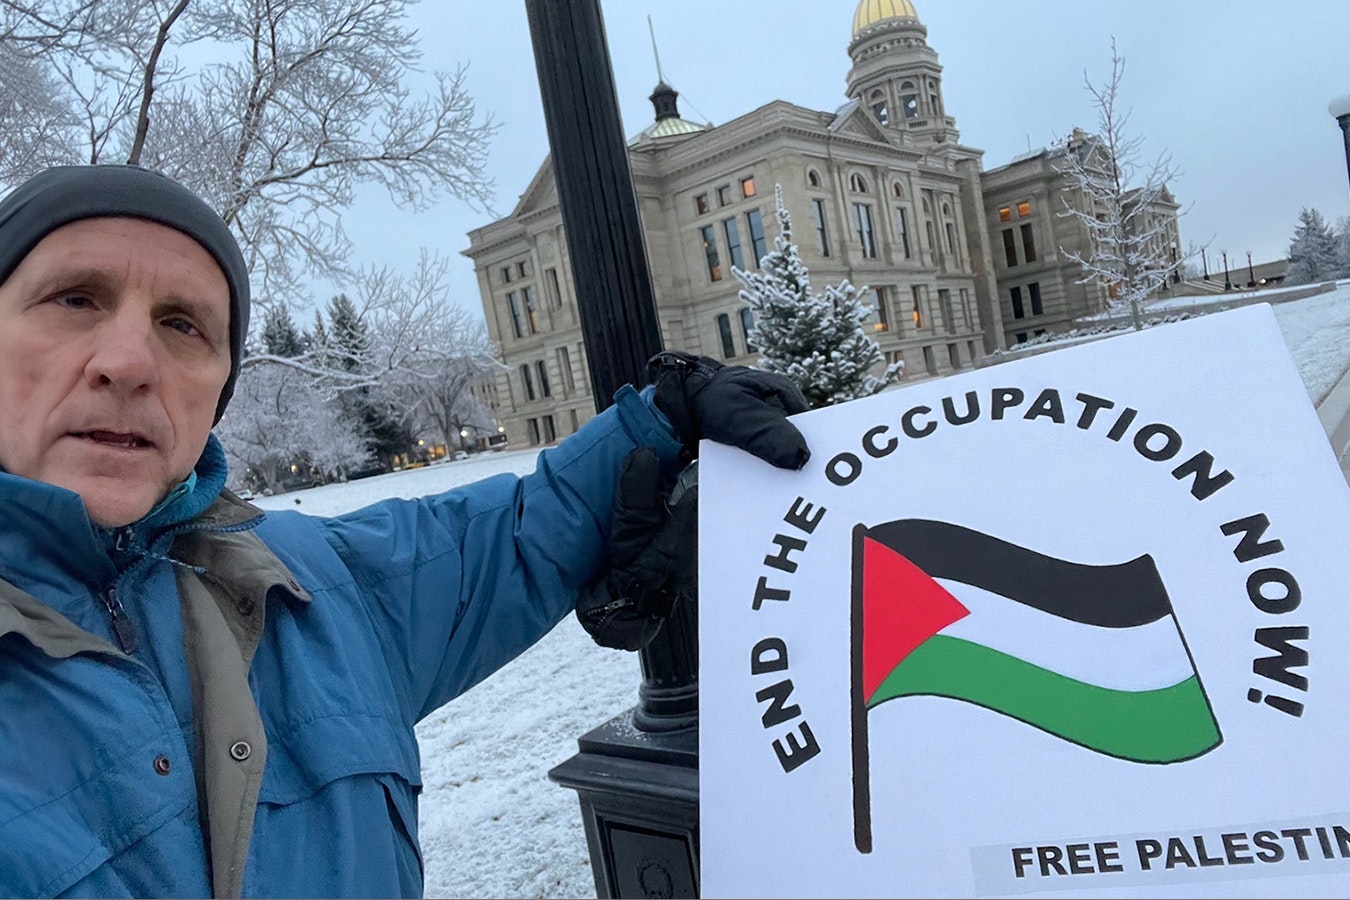 Wyoming native Larry McIlvaine now lives in Jordan, but spent part of his visit back in the Cowboy State last week demonstrating for Palestine at the Capitol in Cheyenne.